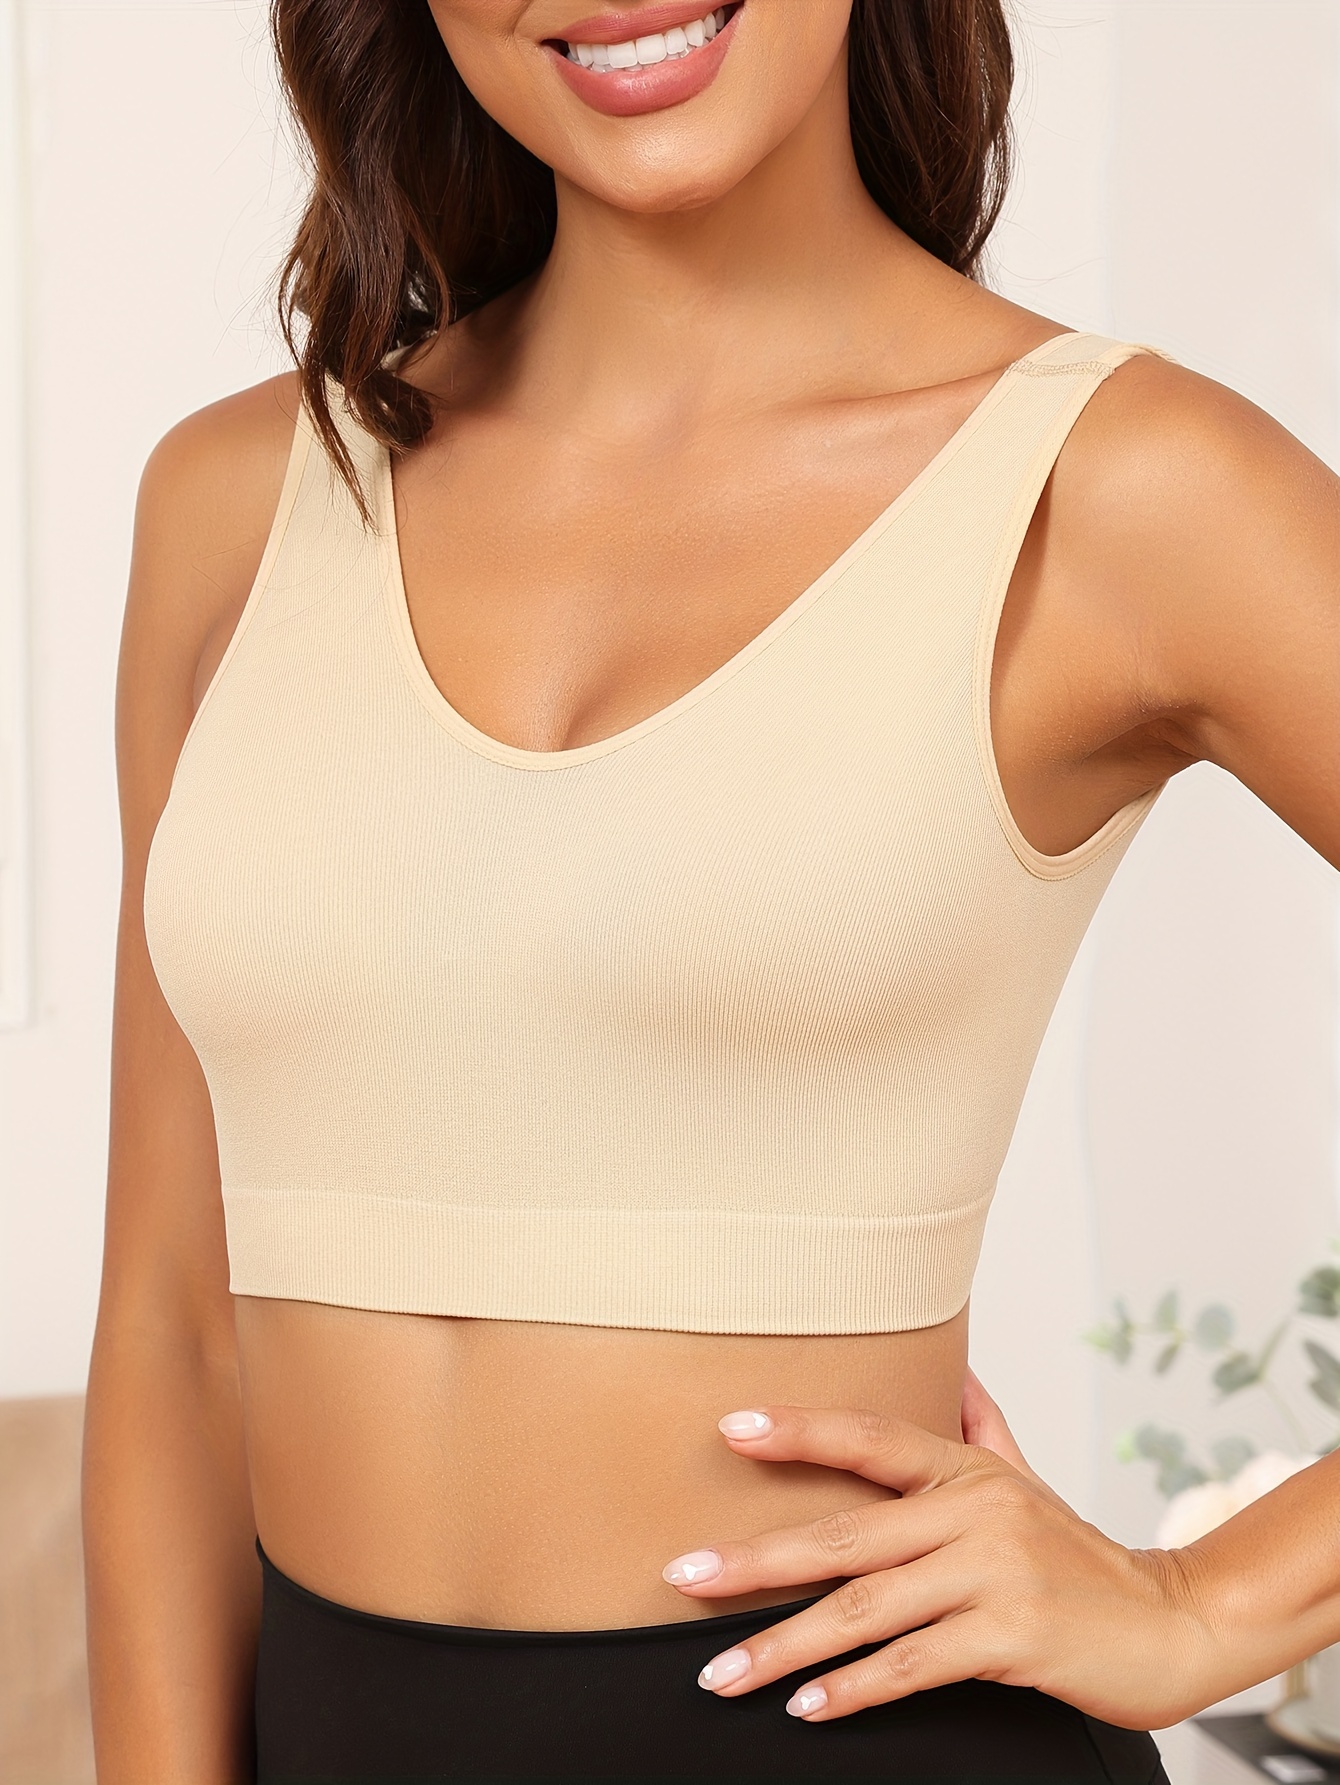 PRETTYWELL Sleep Bras, Seamless Wireless Invisible Thin Daily Bras, Comfy  Soft 710825878493